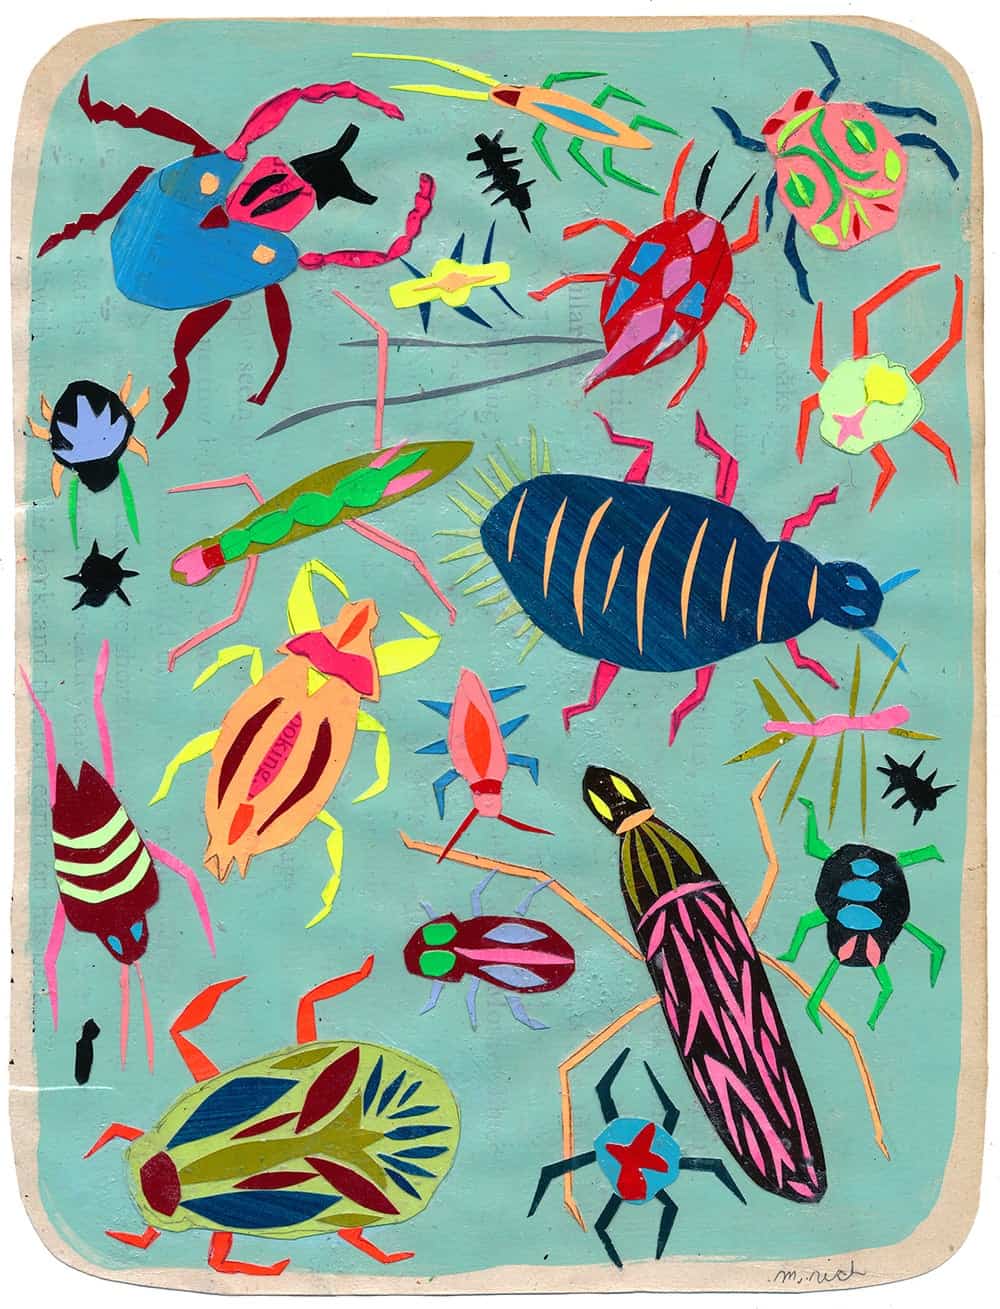 acrylic painting on paper of insects by Martha Rich